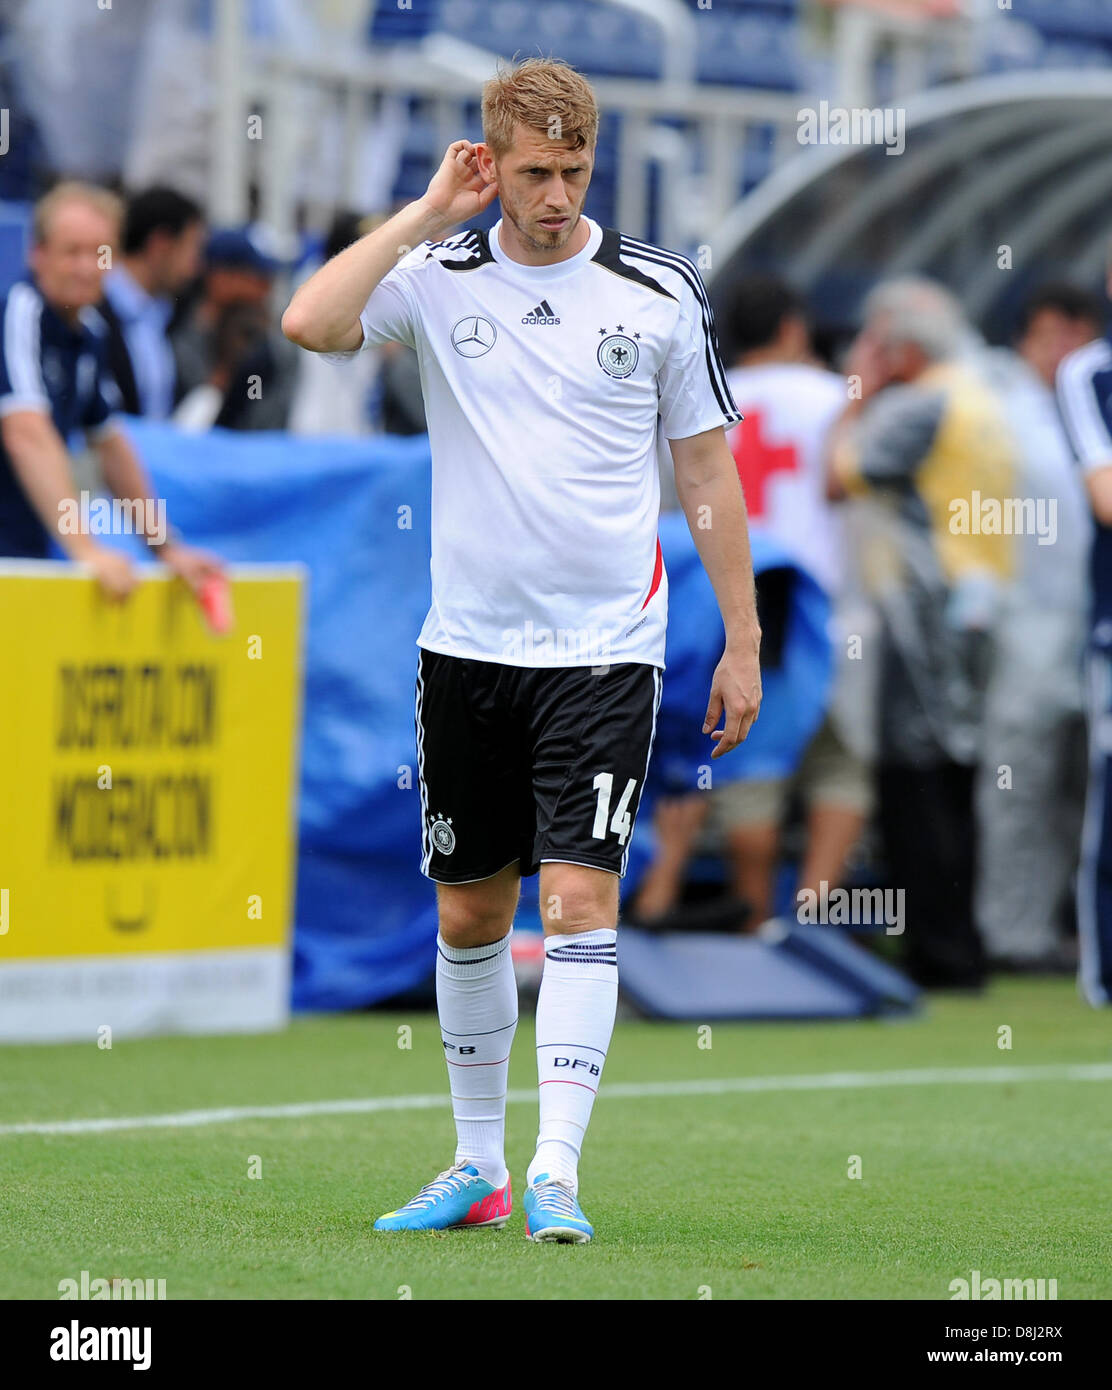 Aaron Hunt of Germany during the international friendly soccer match between Germany and Ecuador at FAU stadium in Boca Raton, Florida, USA, 29 May 2013. Photo: Thomas Eisenhuth/dpa Stock Photo